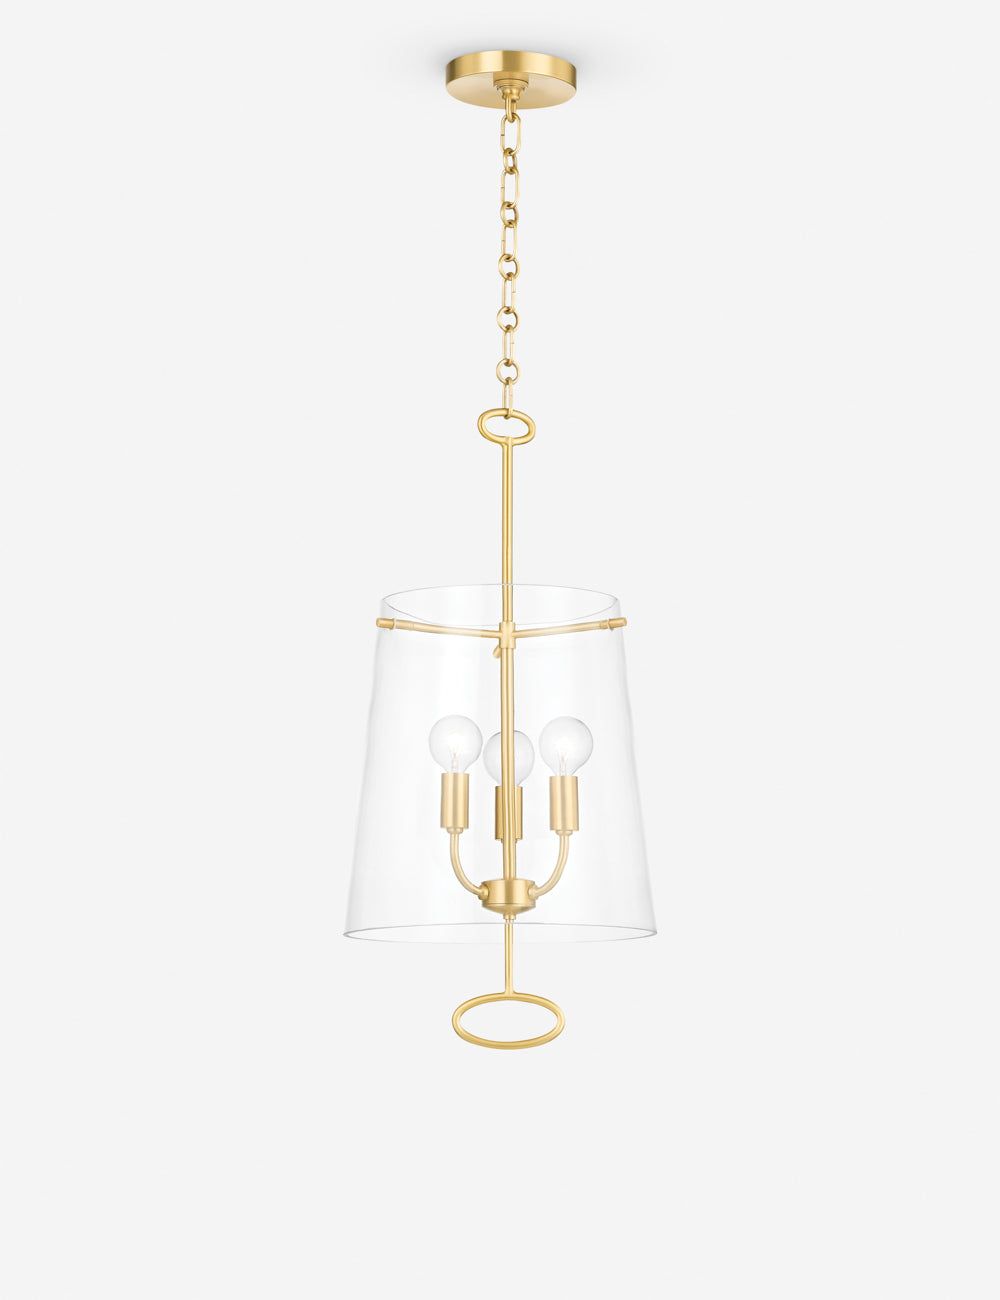 James Aged Brass 3-Light Island Drum Pendant with Clear Glass